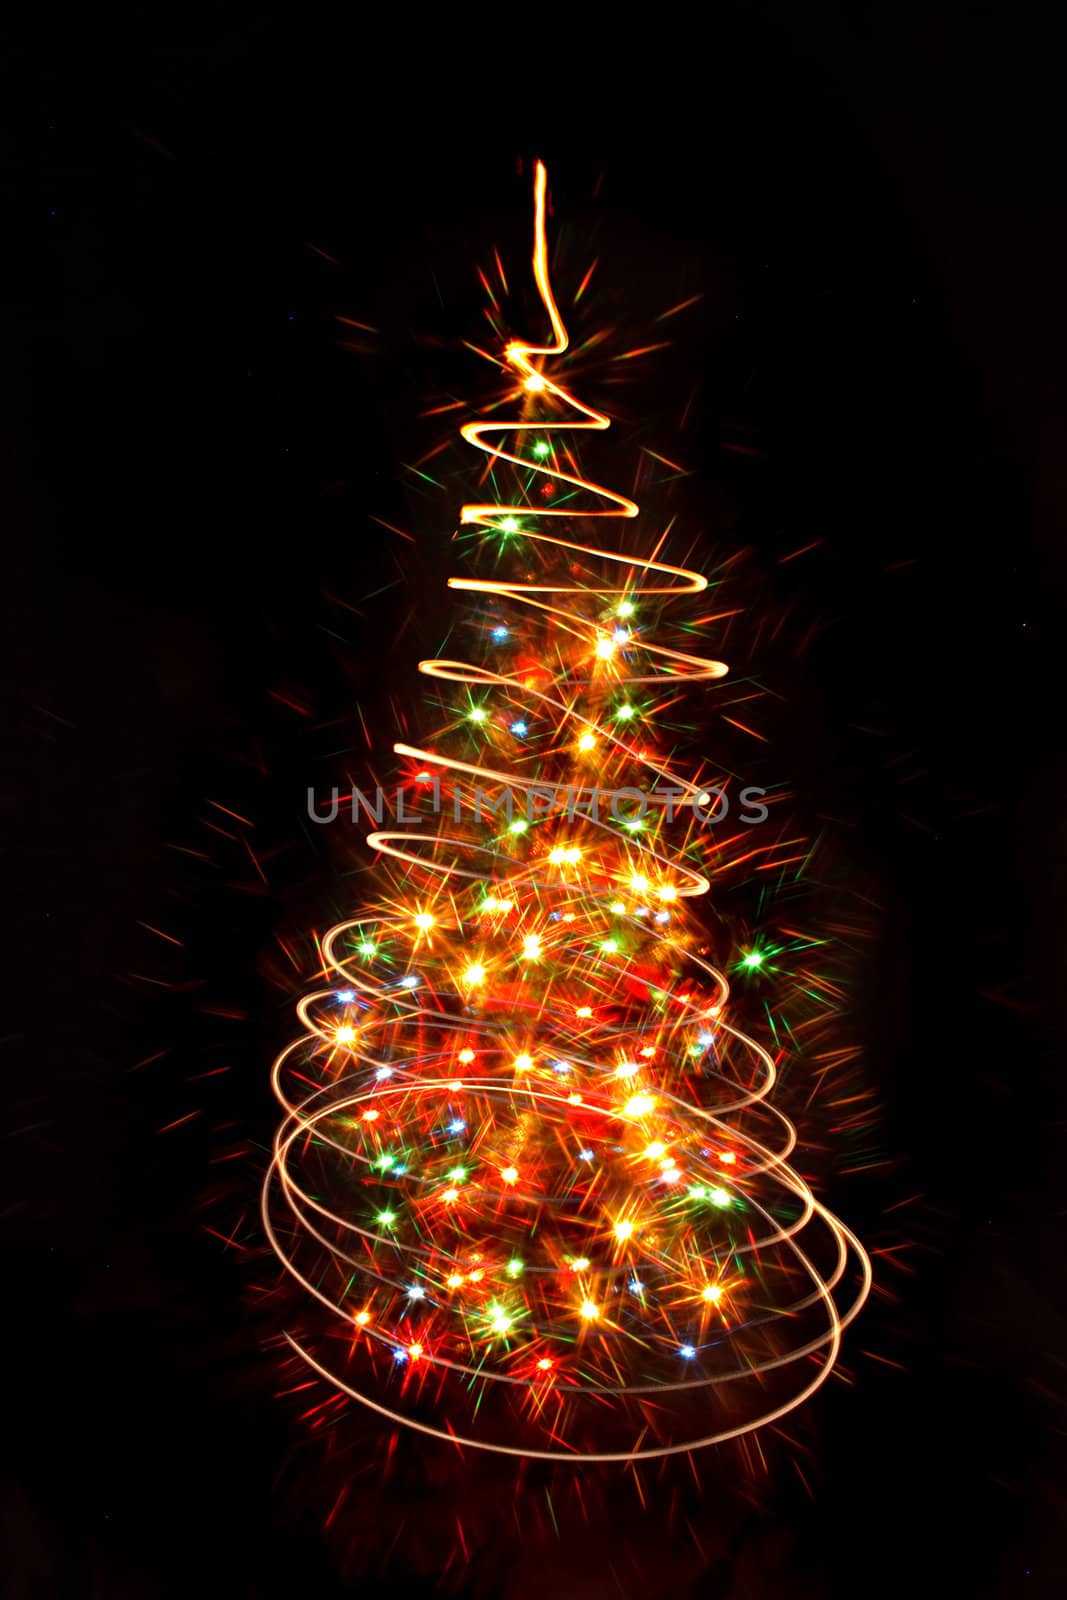 xmas tree from the lights on the black background